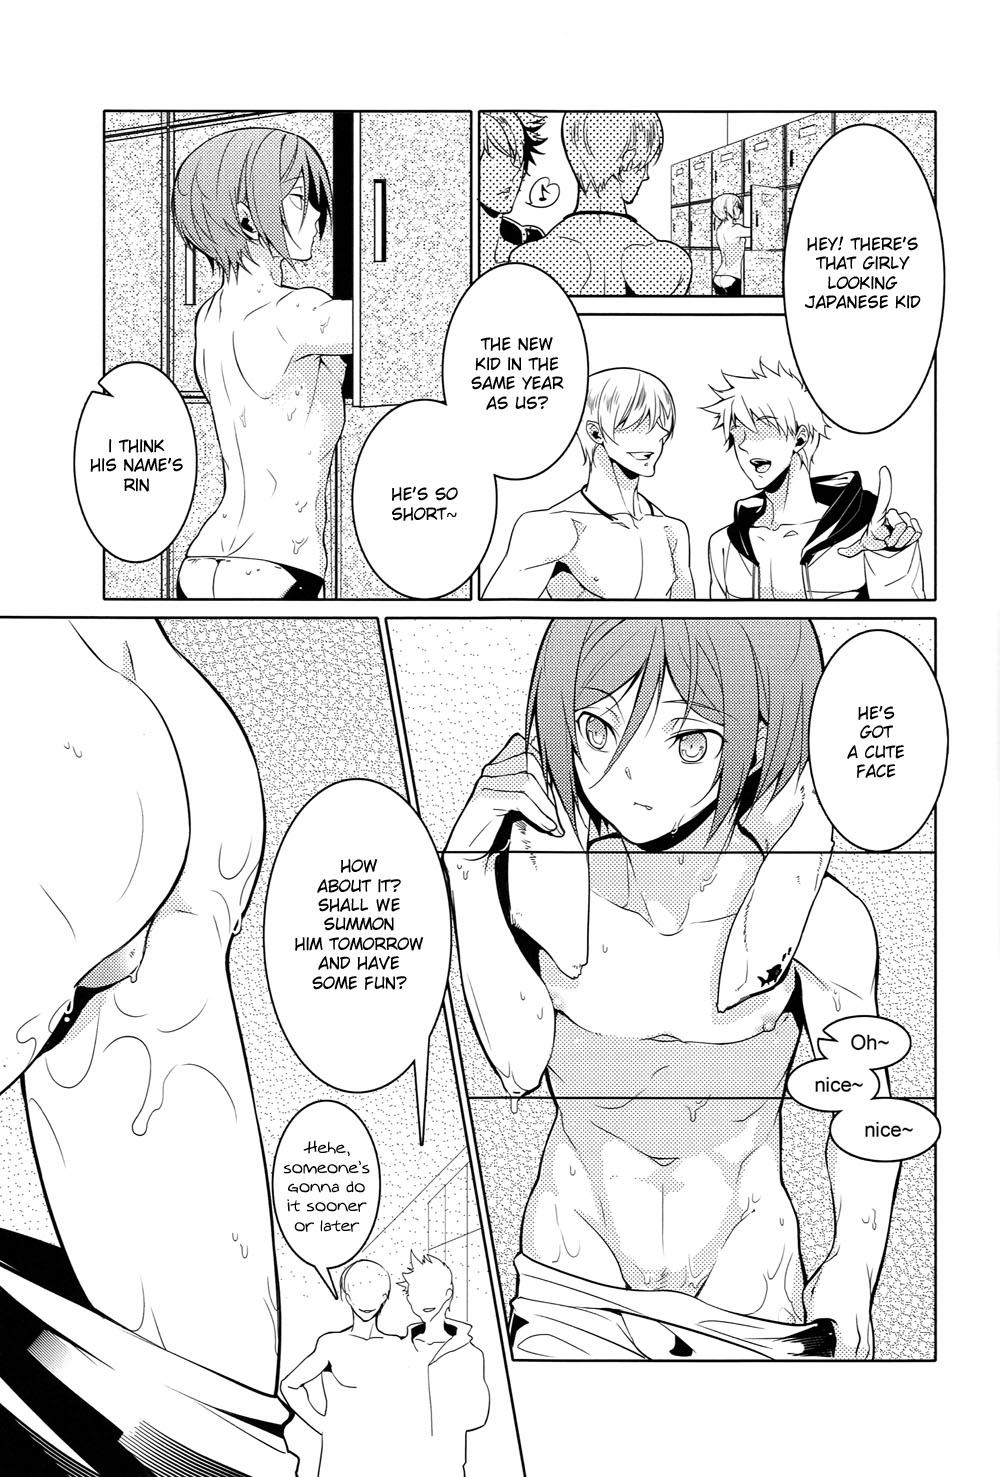 Mexican Rin-chan! Ganbare!! - Free Gay 3some - Page 6